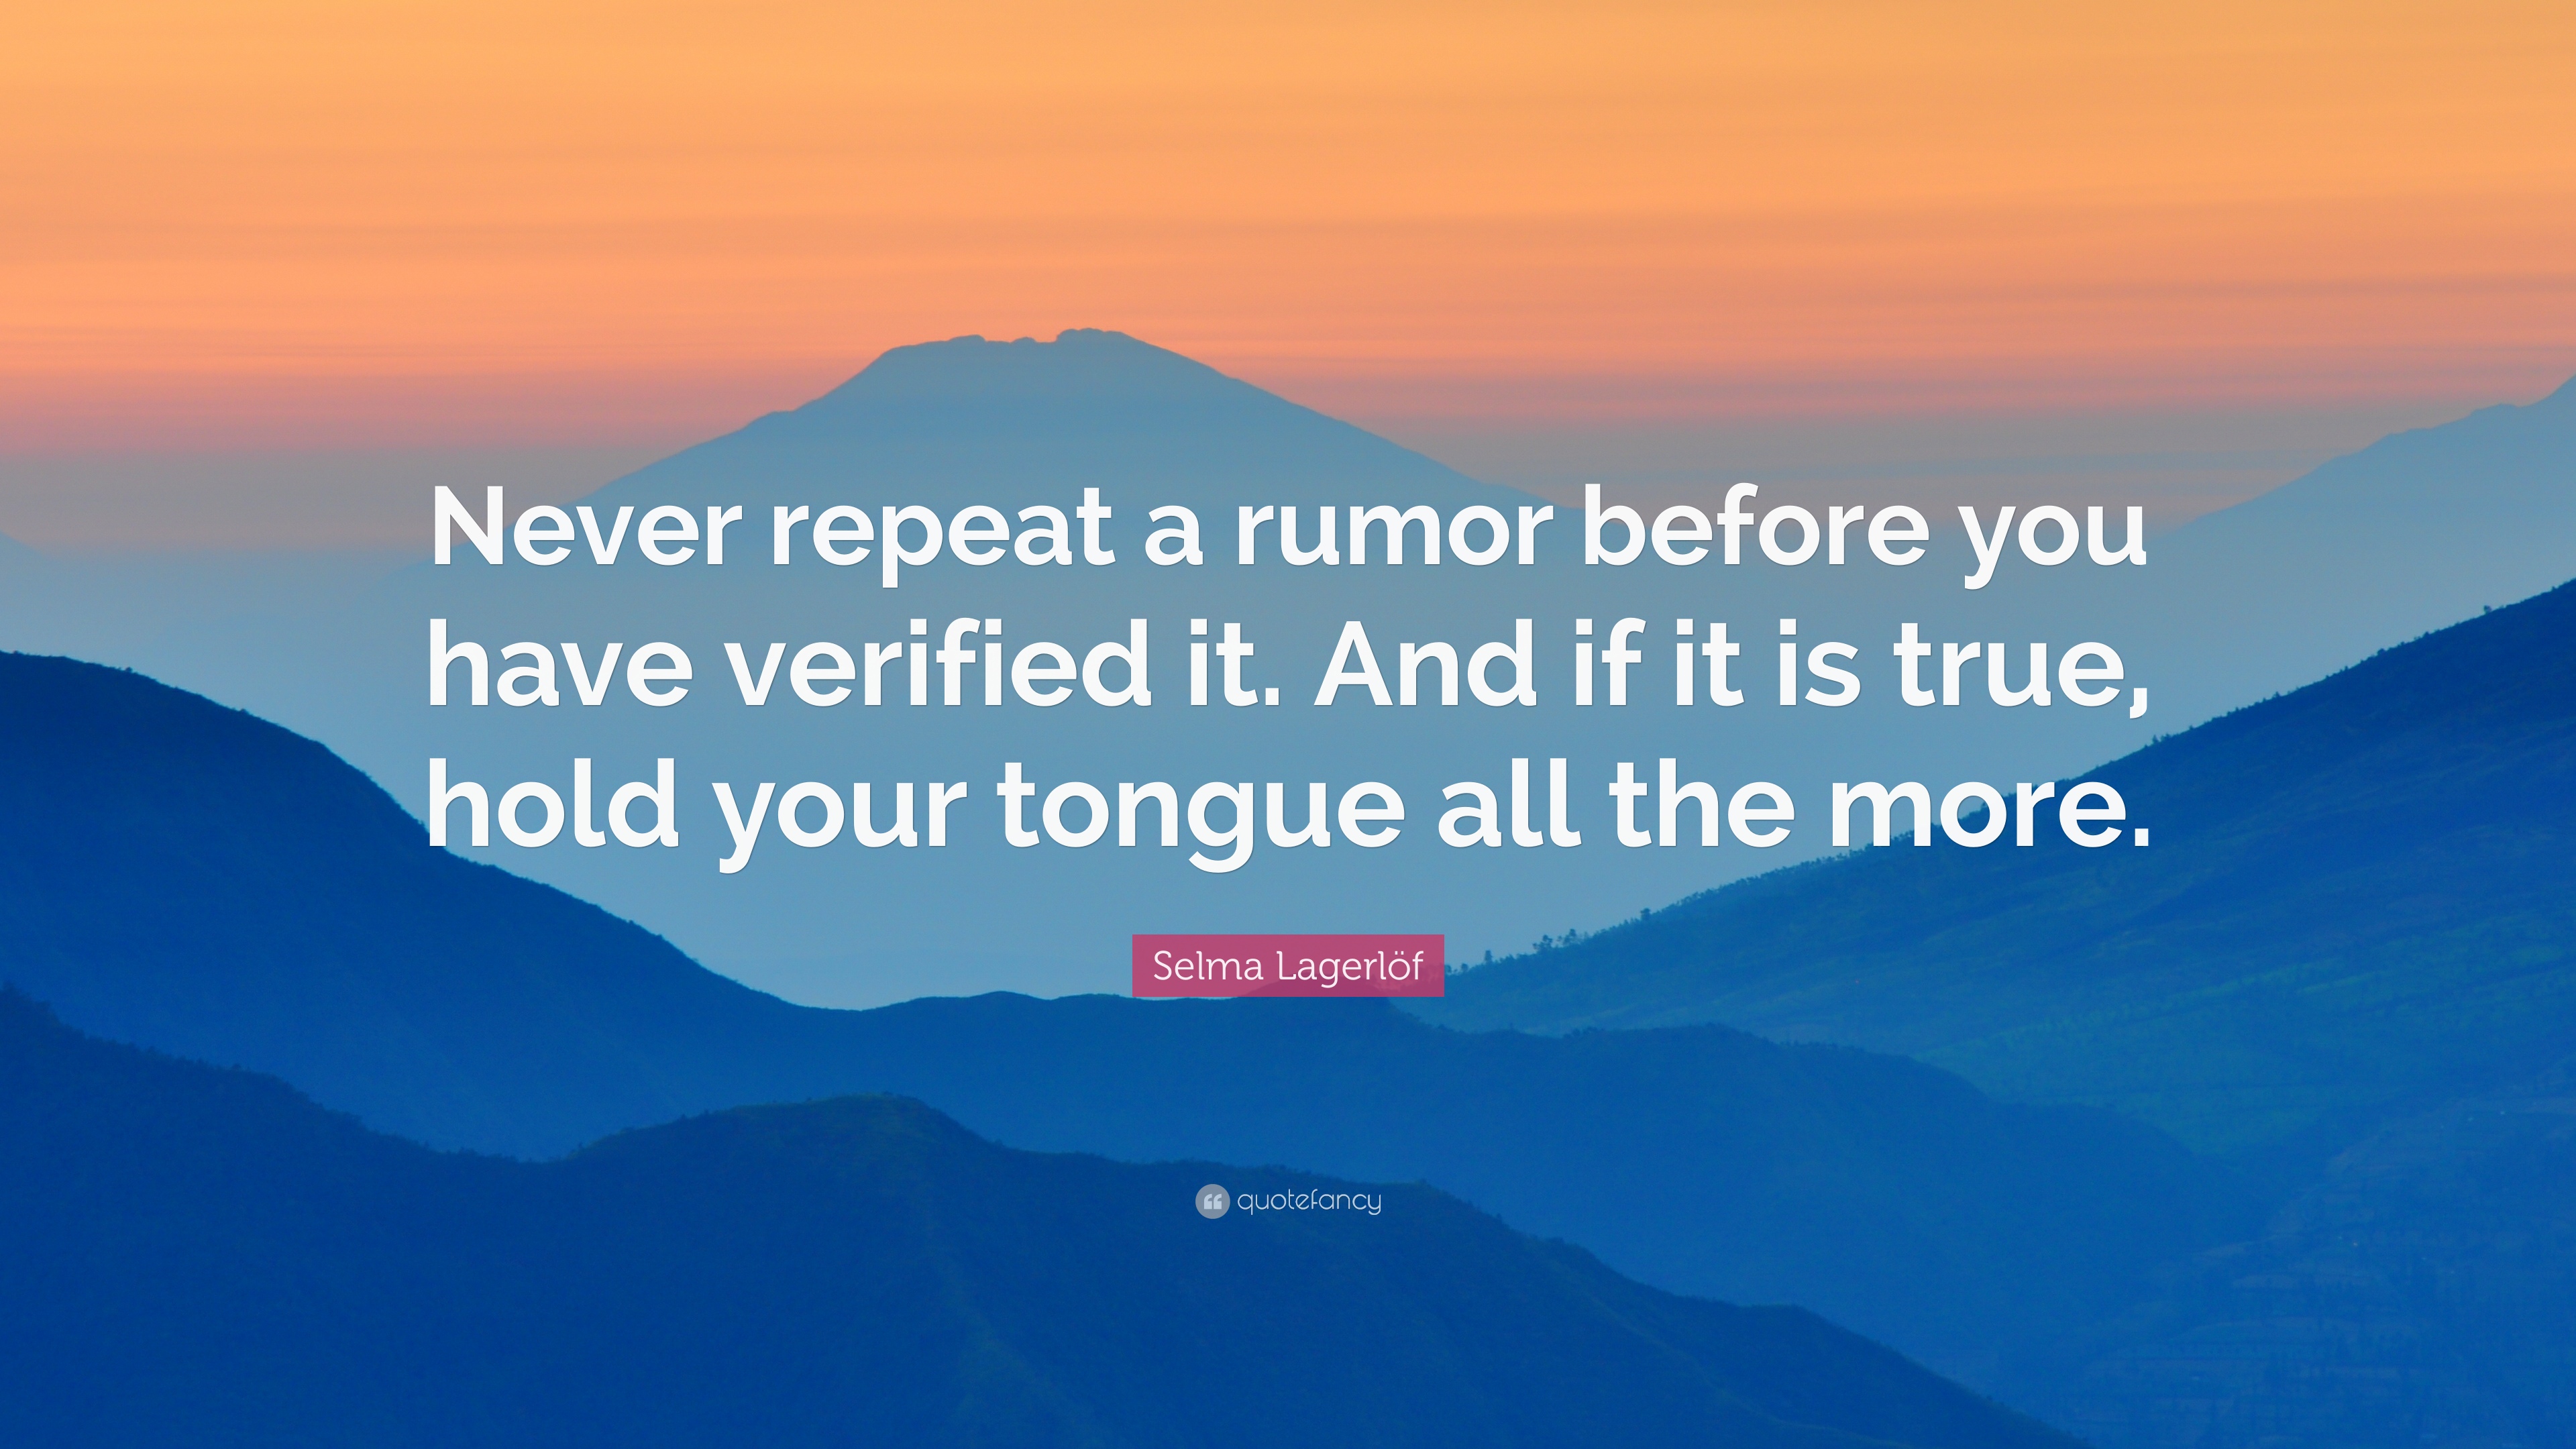 Never repeat a rumor before you have verified it. And if it is true, hold your tongue all the more